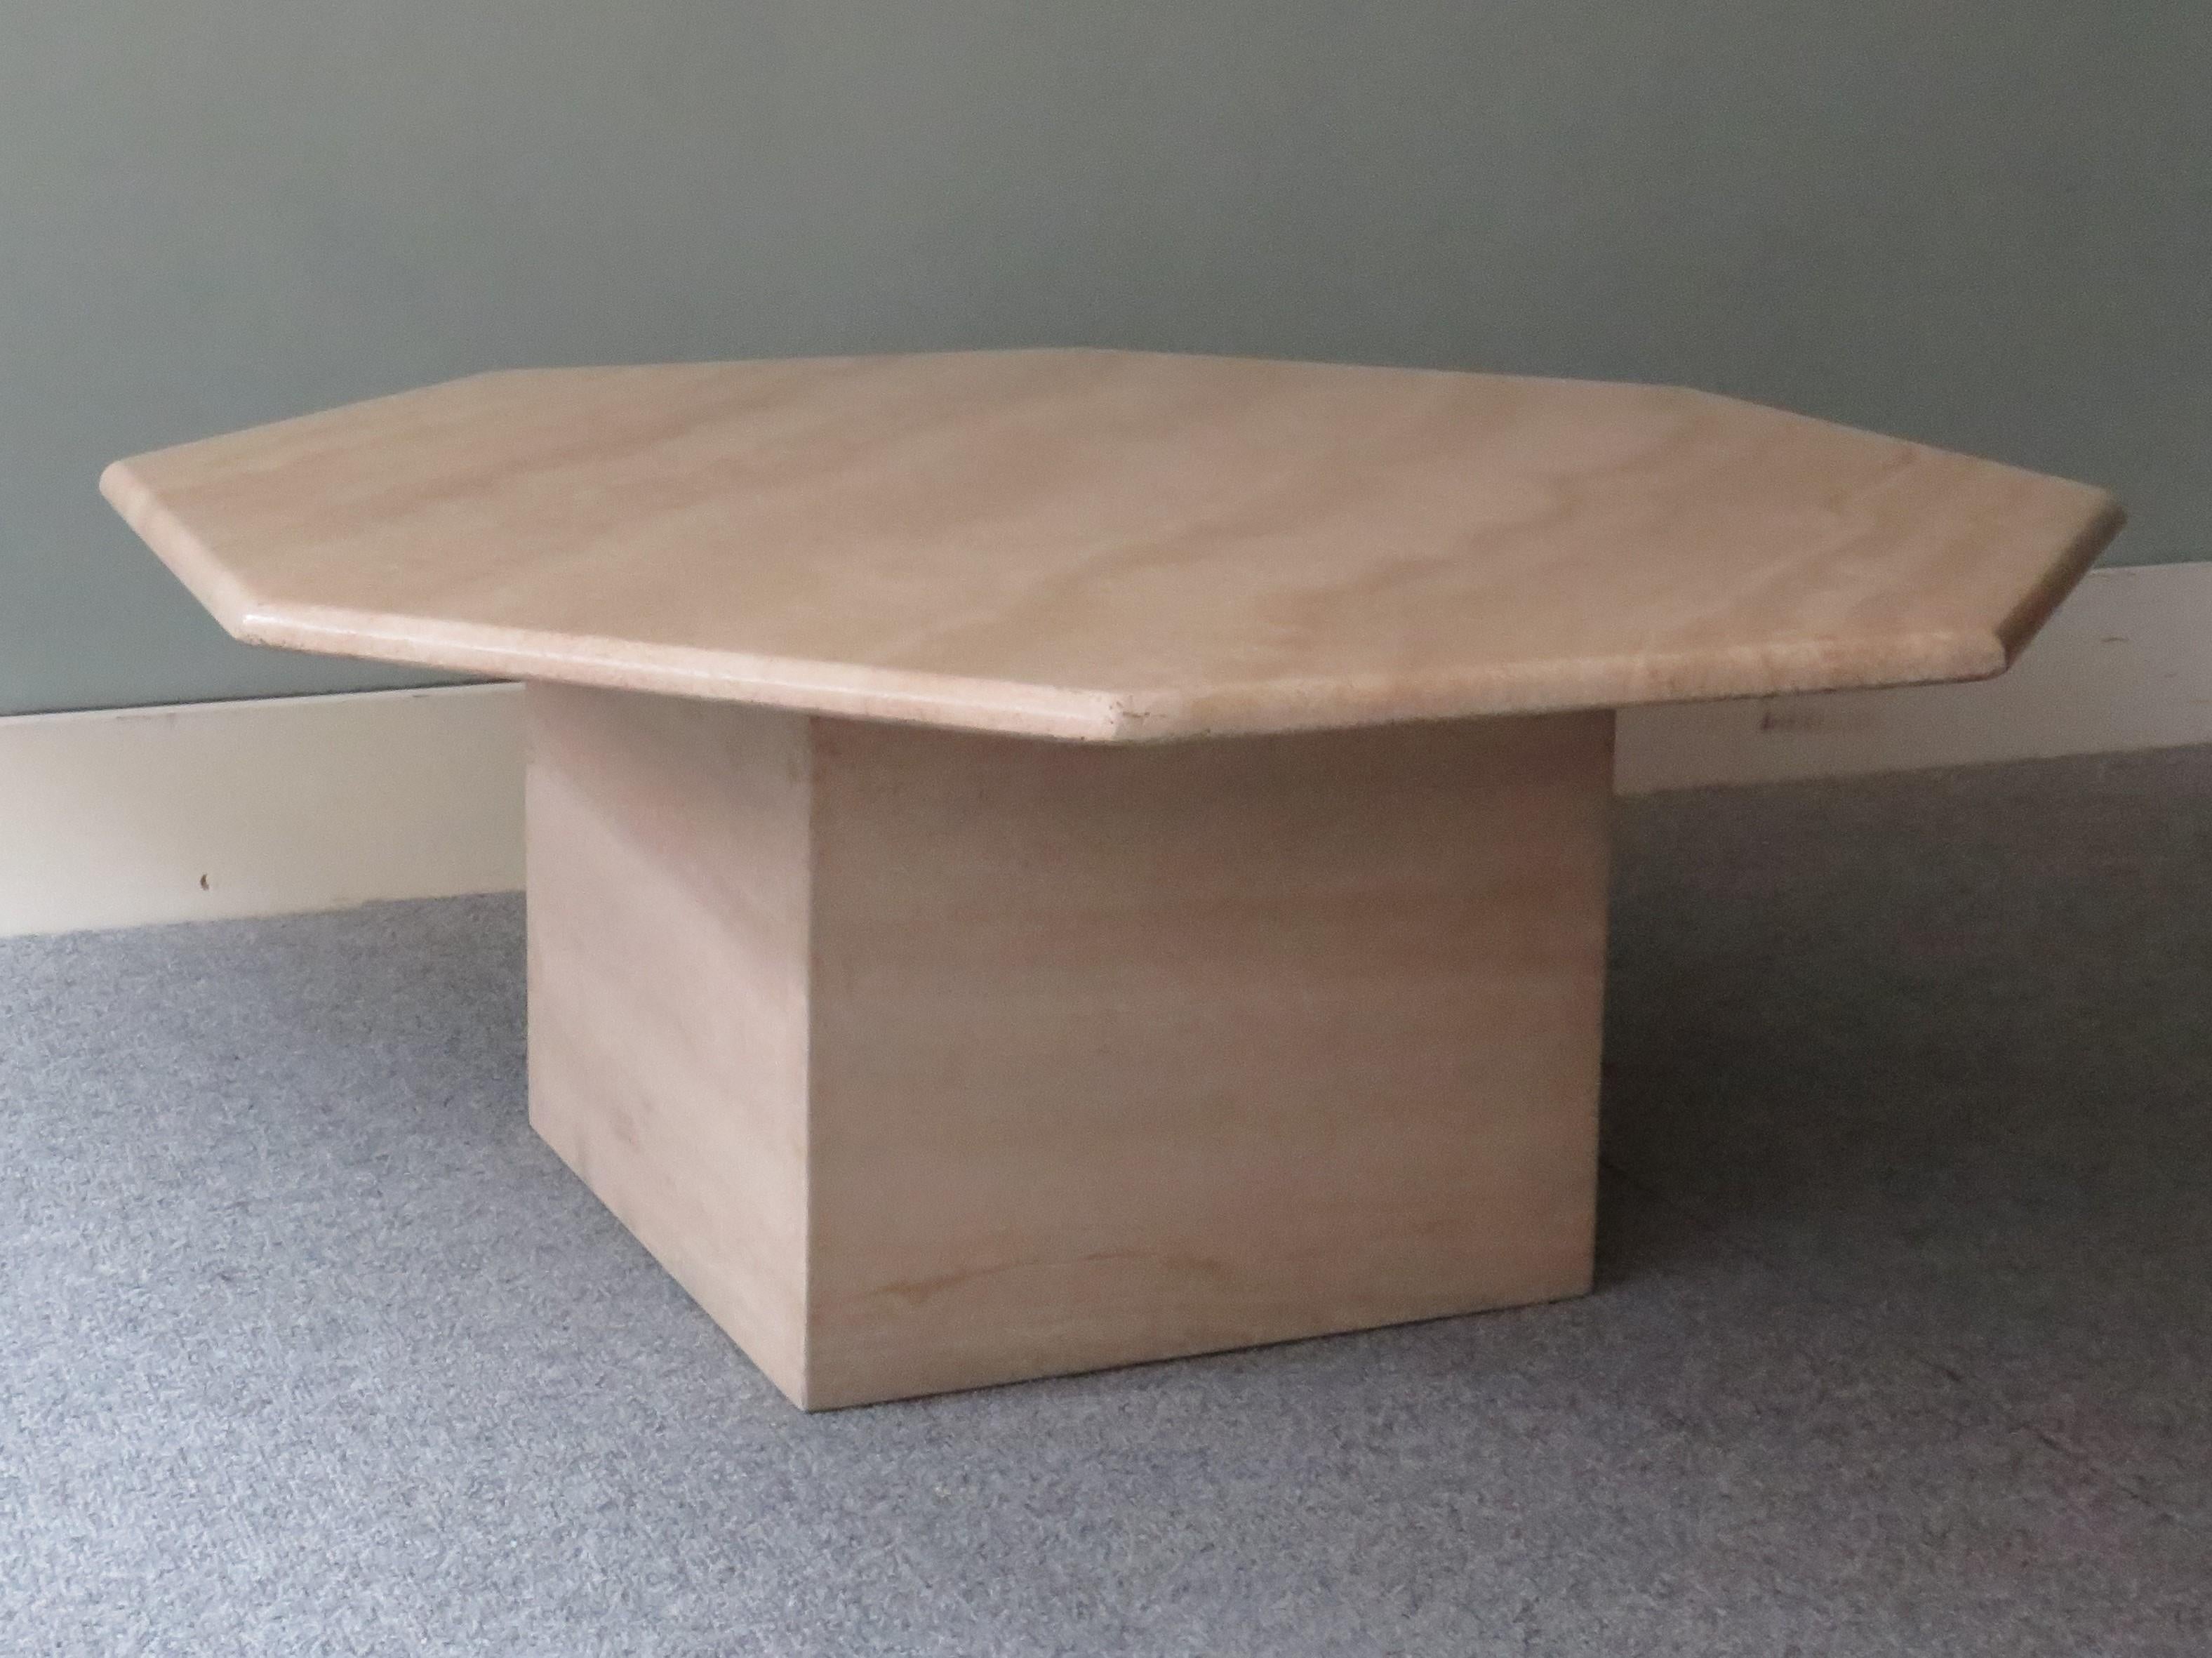 Octagonal travertine coffee table, Italy 1970s.
The item is in good condition, no breaks or scratches.
De top of the table is detachable.
Dimensions: H 37 and W x D 90 x 90 cm.